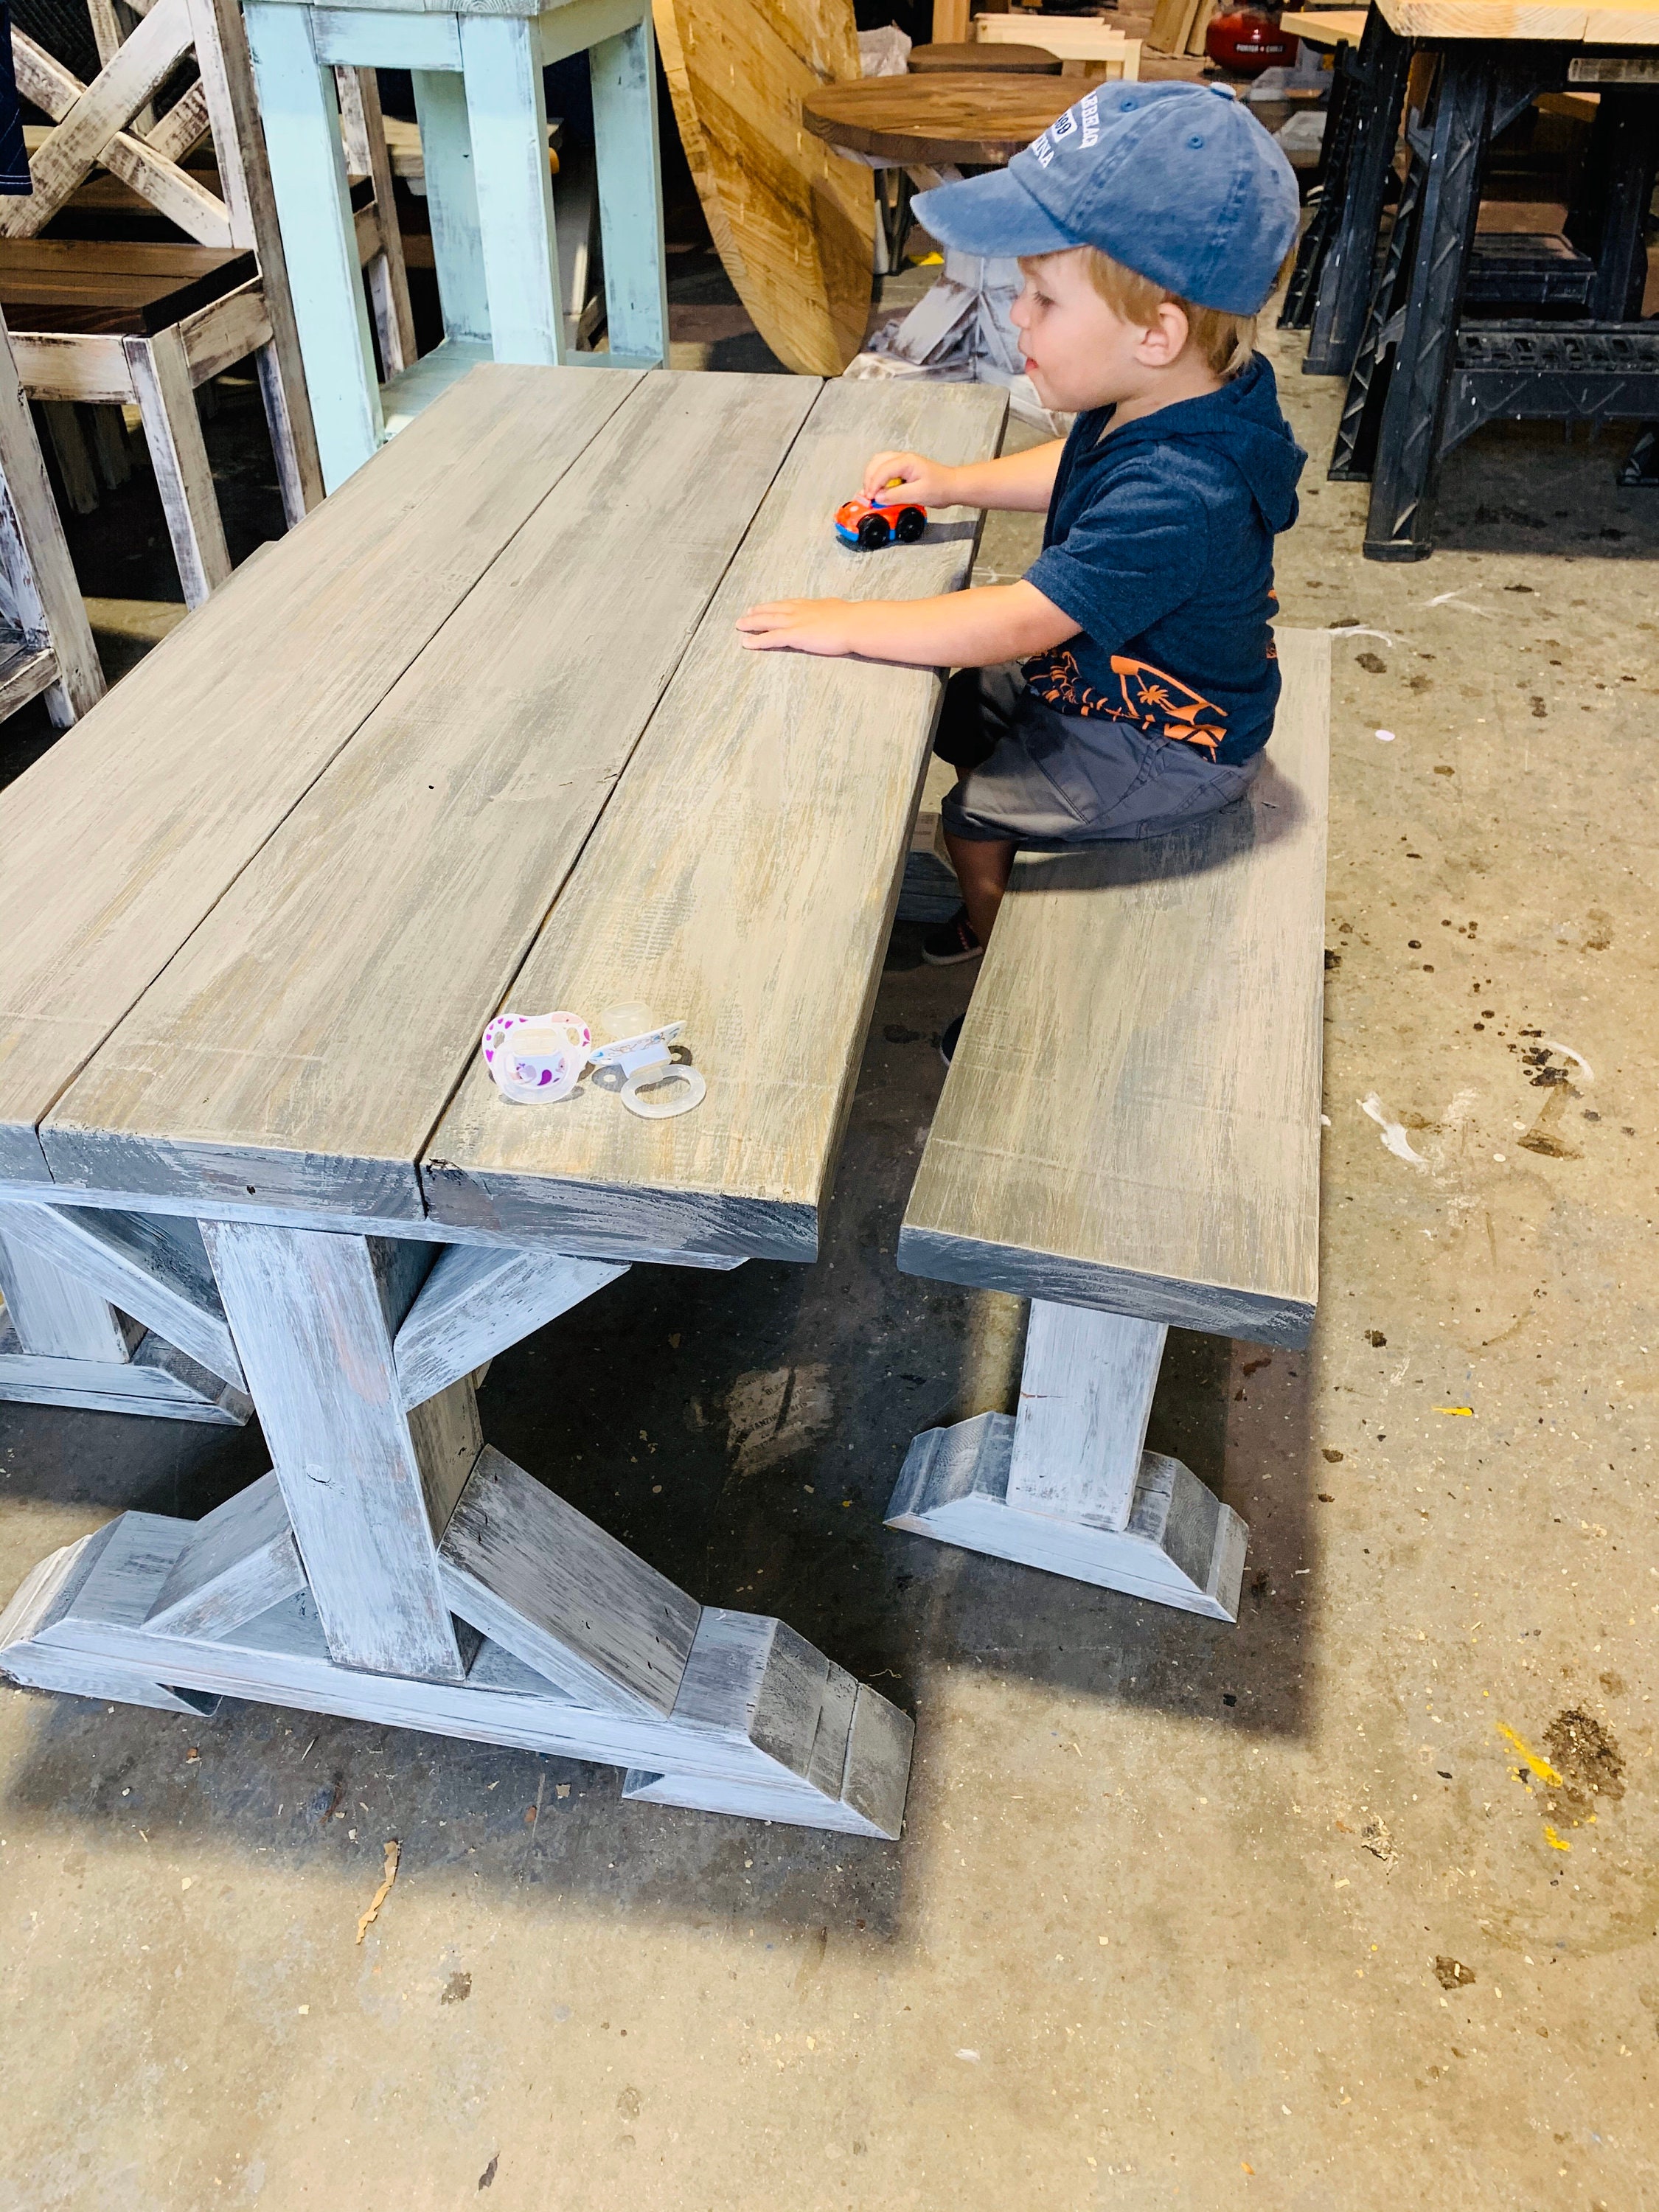 children's farmhouse table and chairs